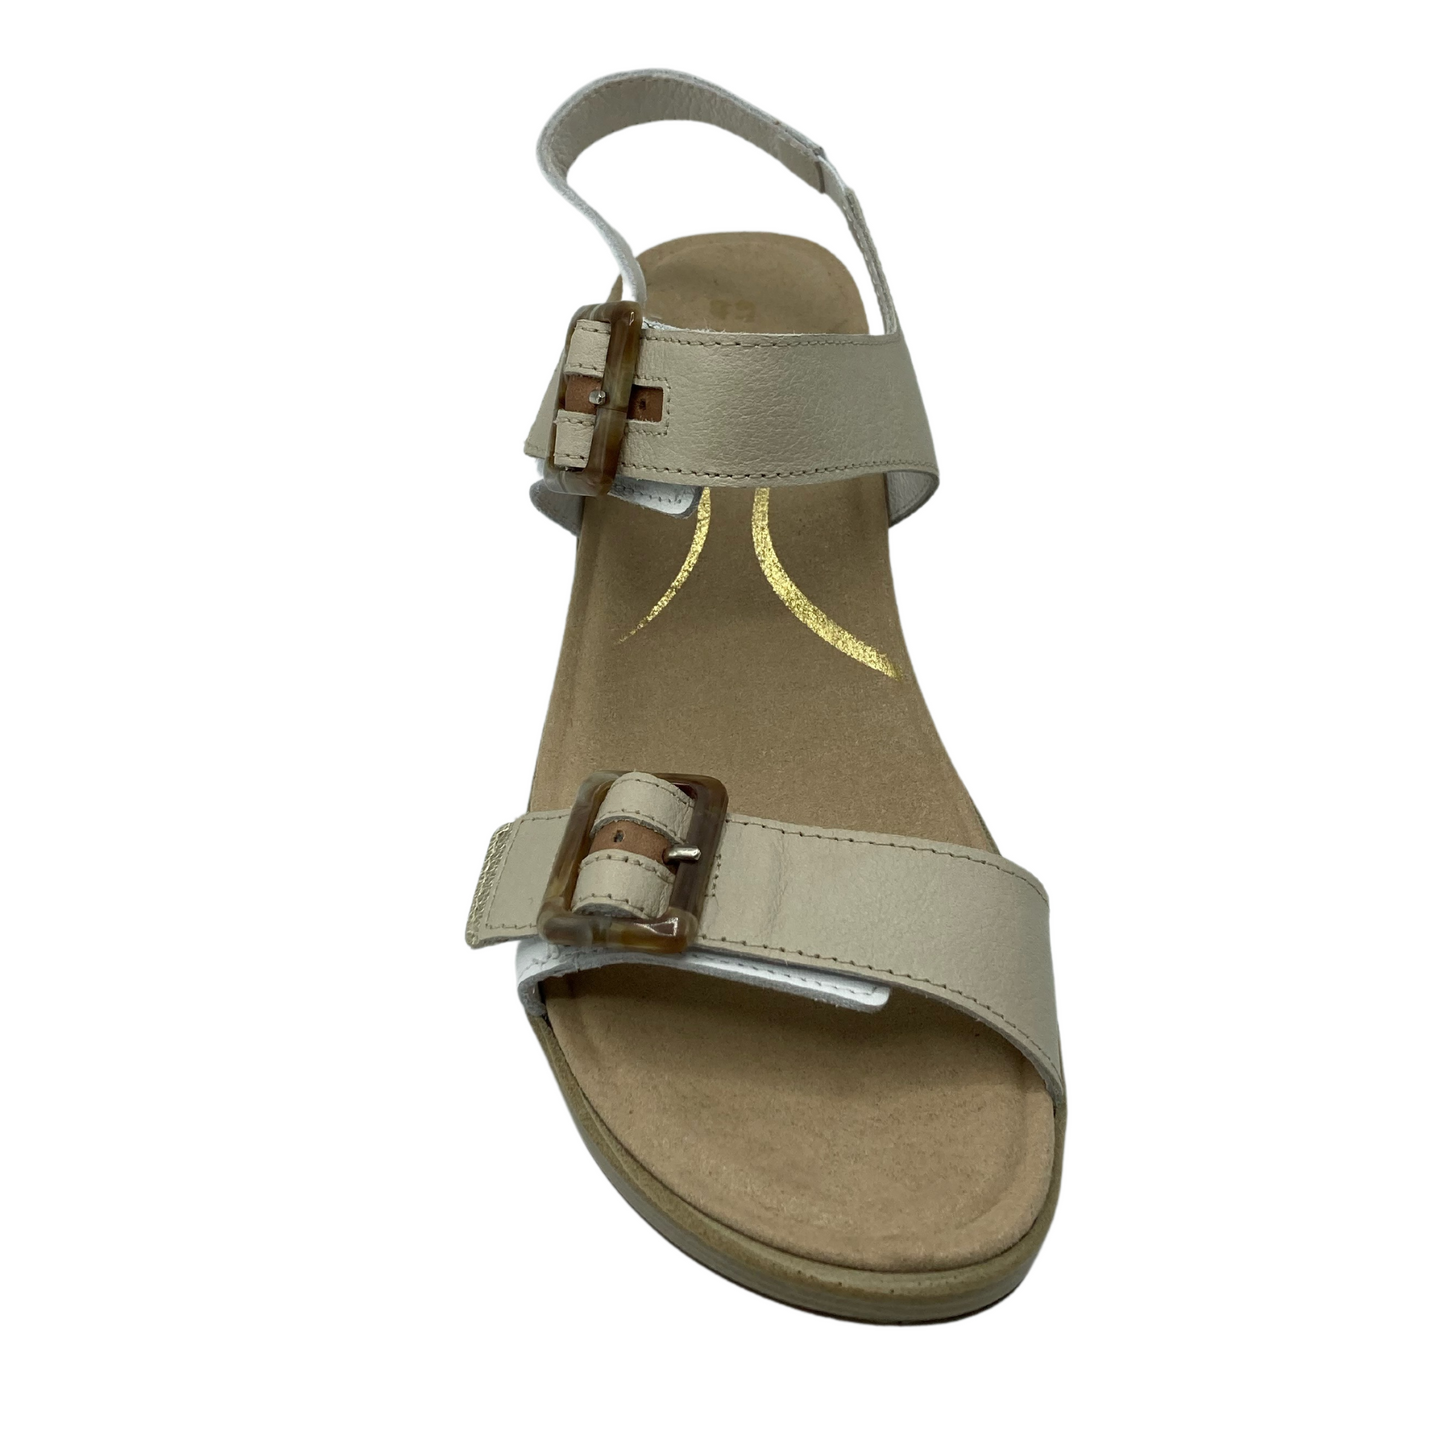 Top view of beige and white sandal with buckle straps